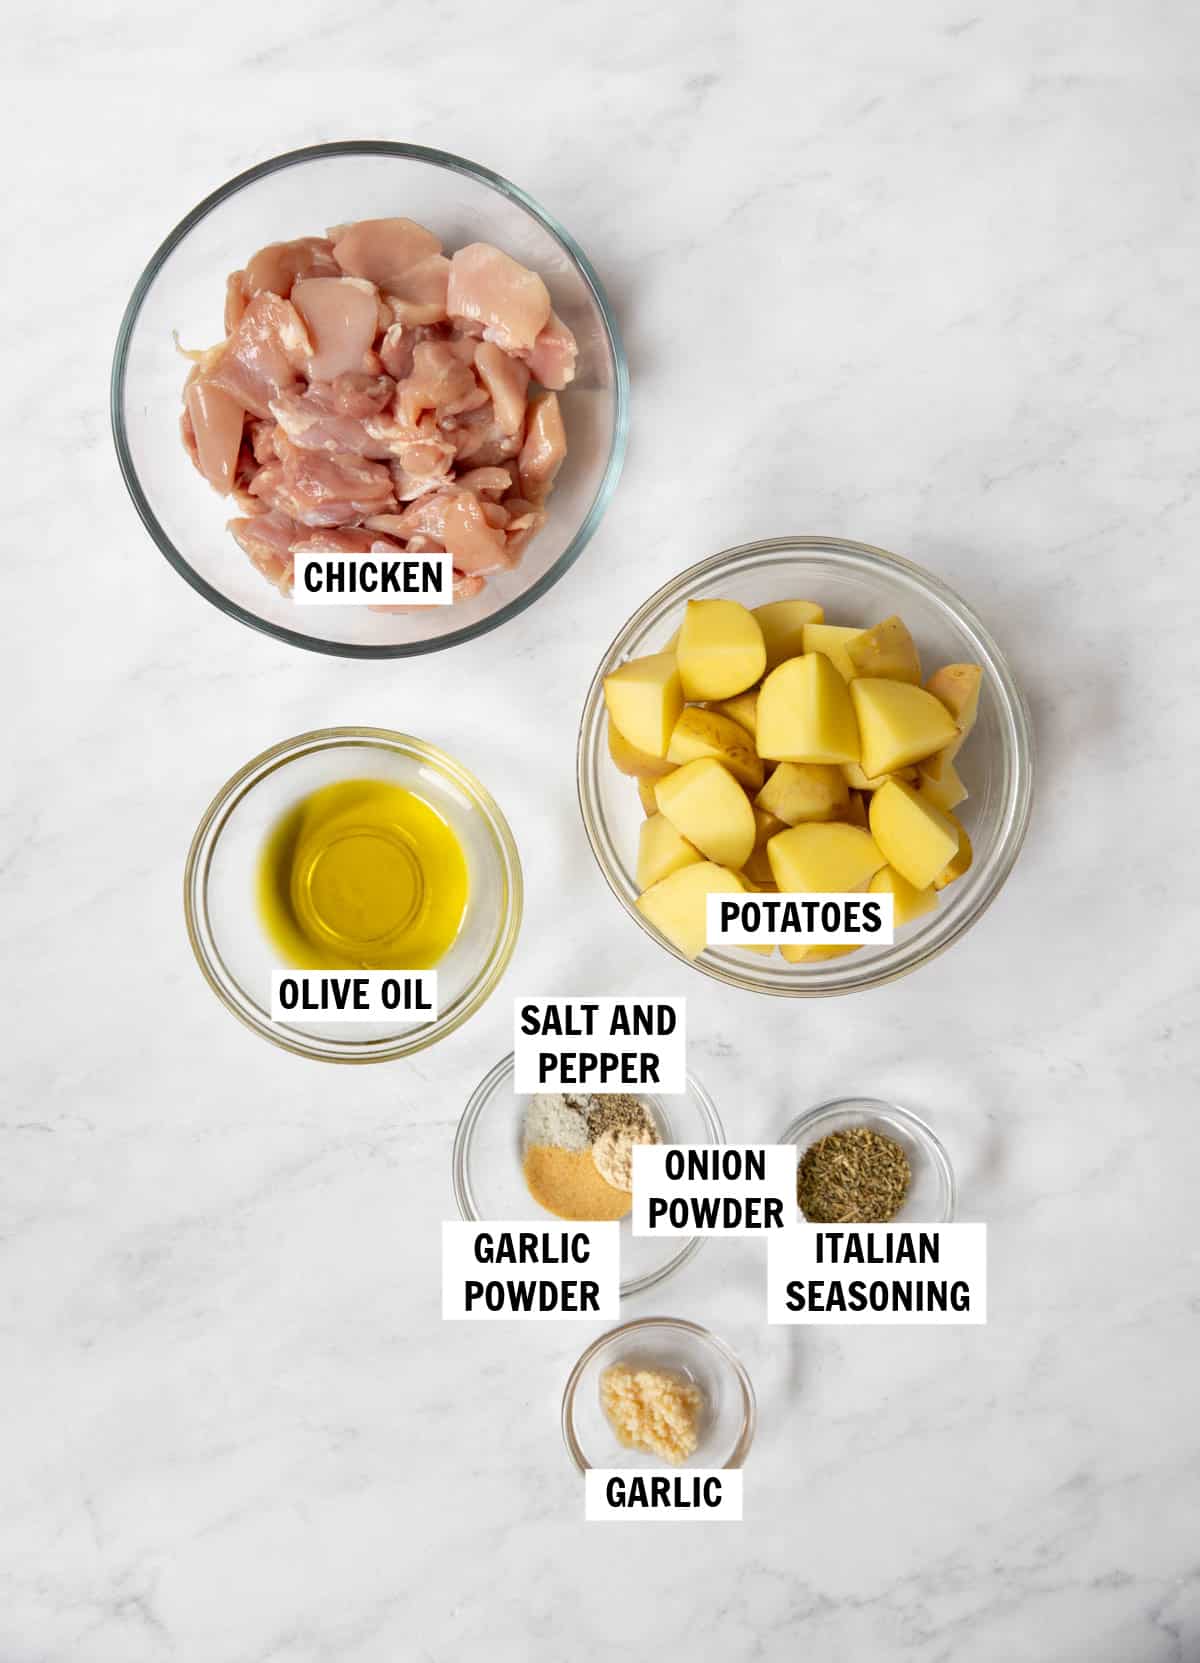 All of the ingredients for chicken and potatoes on a white countertop in bowls including chicken thighs, yellow potatoes, olive oil, garlic powder, onion powder, italian seasoning, garlic and salt and pepper.